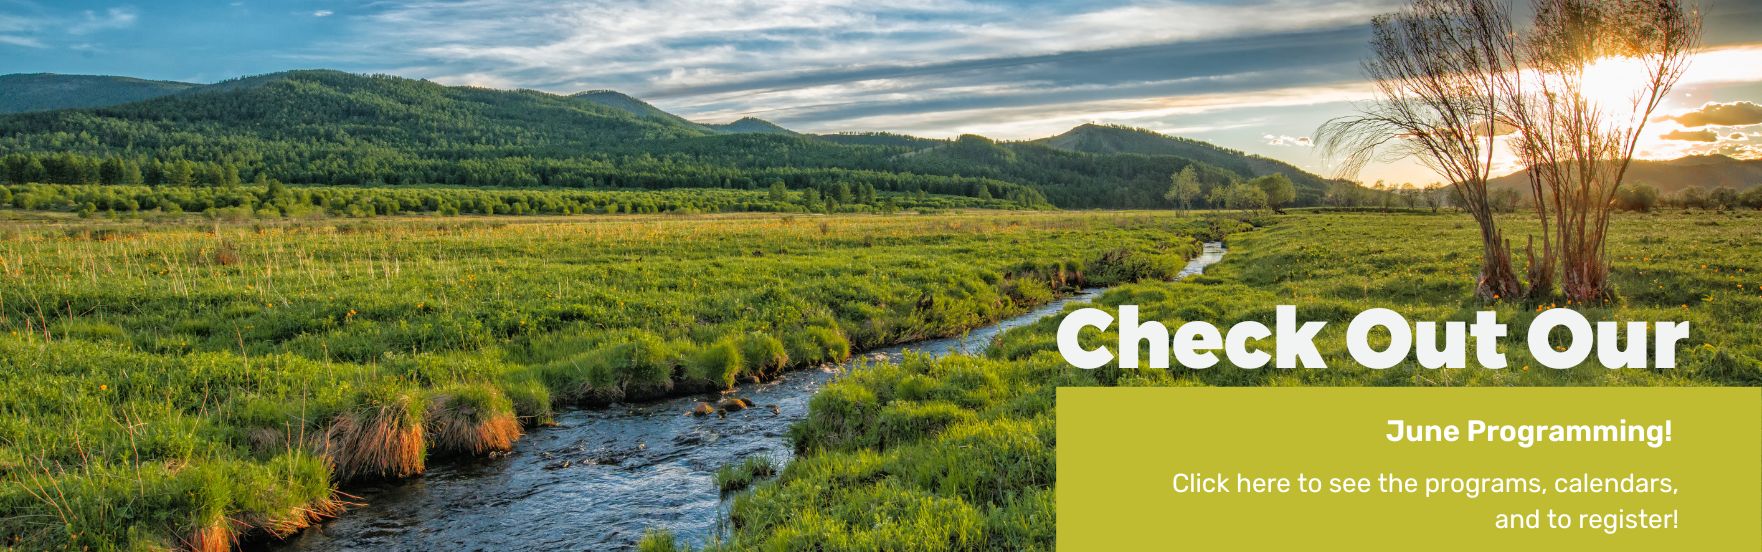 A creek running through a valley with text advertising to click for june programs.